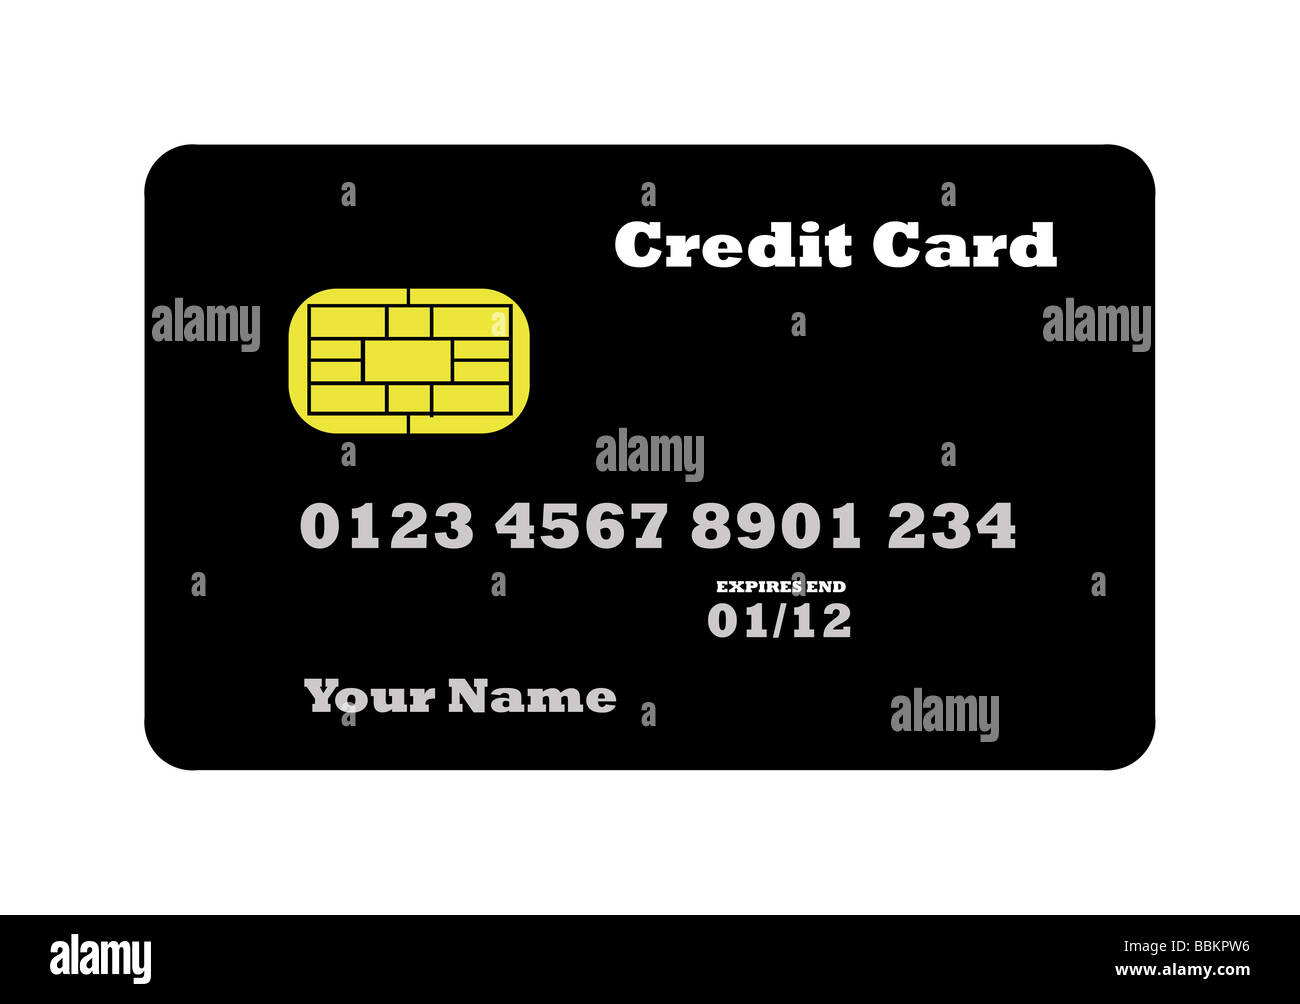 Credit Card in black with biometric strip isolated on white background Stock Photo